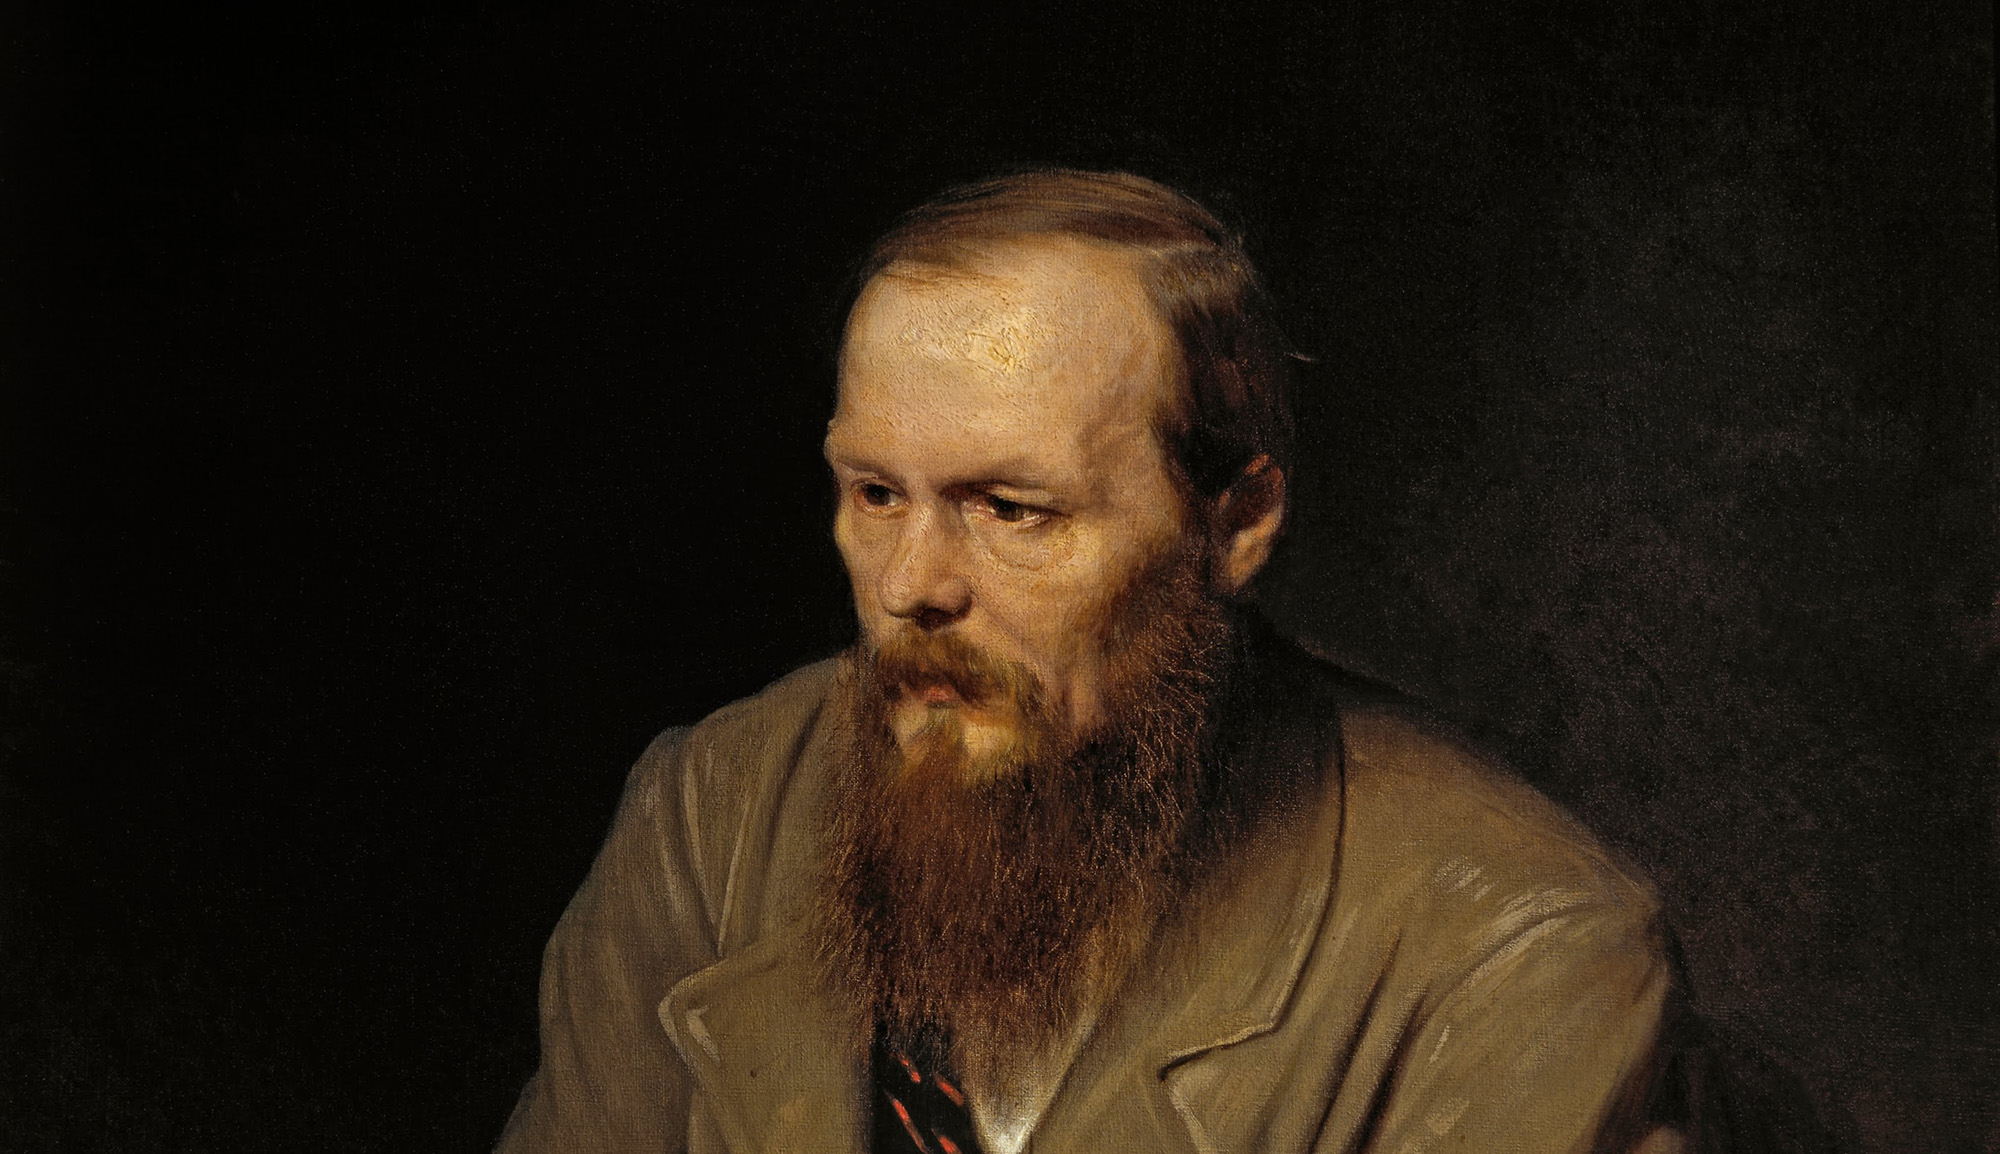 Why Dostoevsky Loved Humanity and Hated the Jews